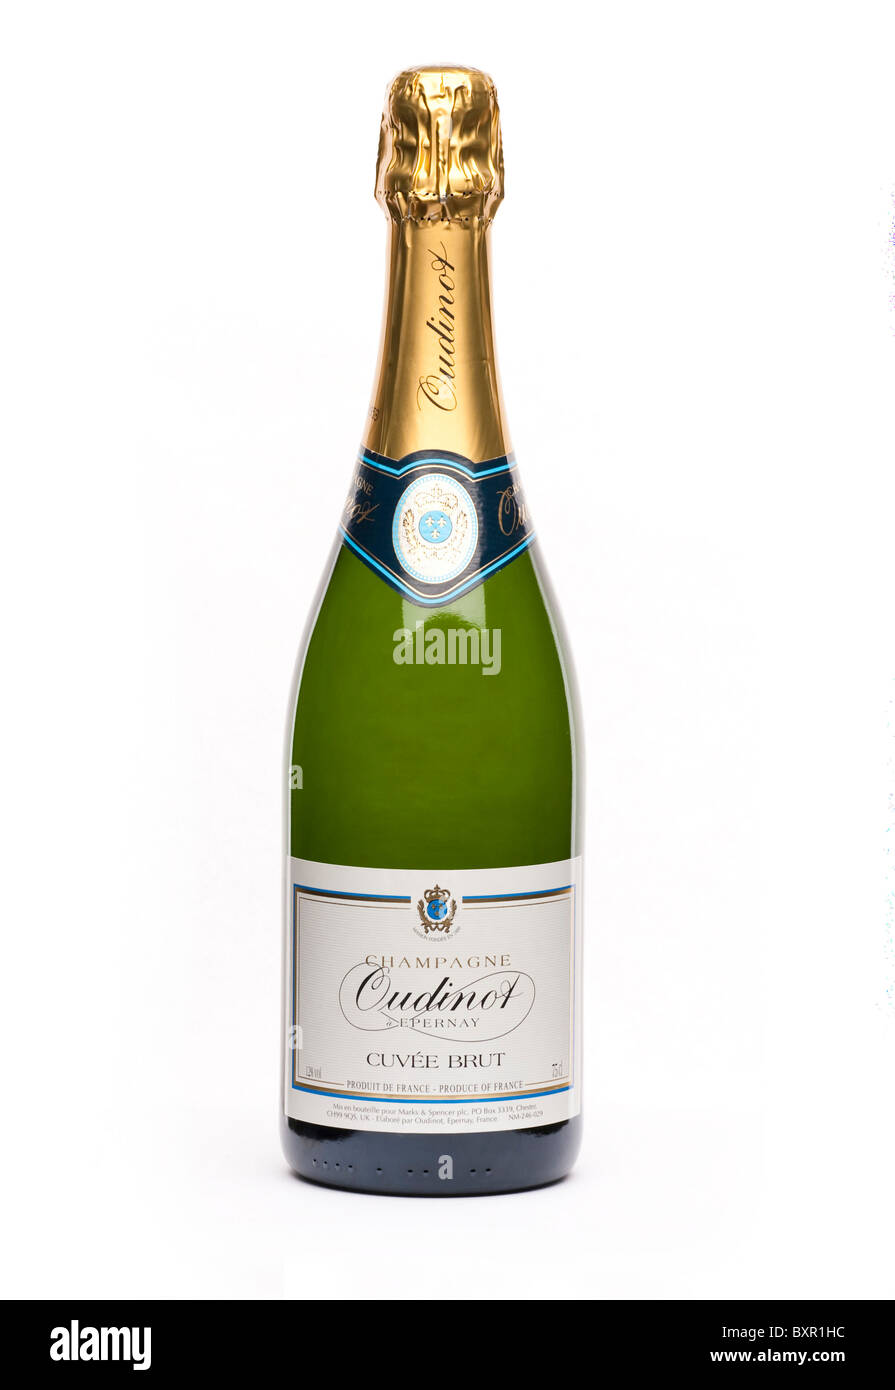 bottle of Champagne French Cuvee Brut  Oudinot a Epernay Stock Photo